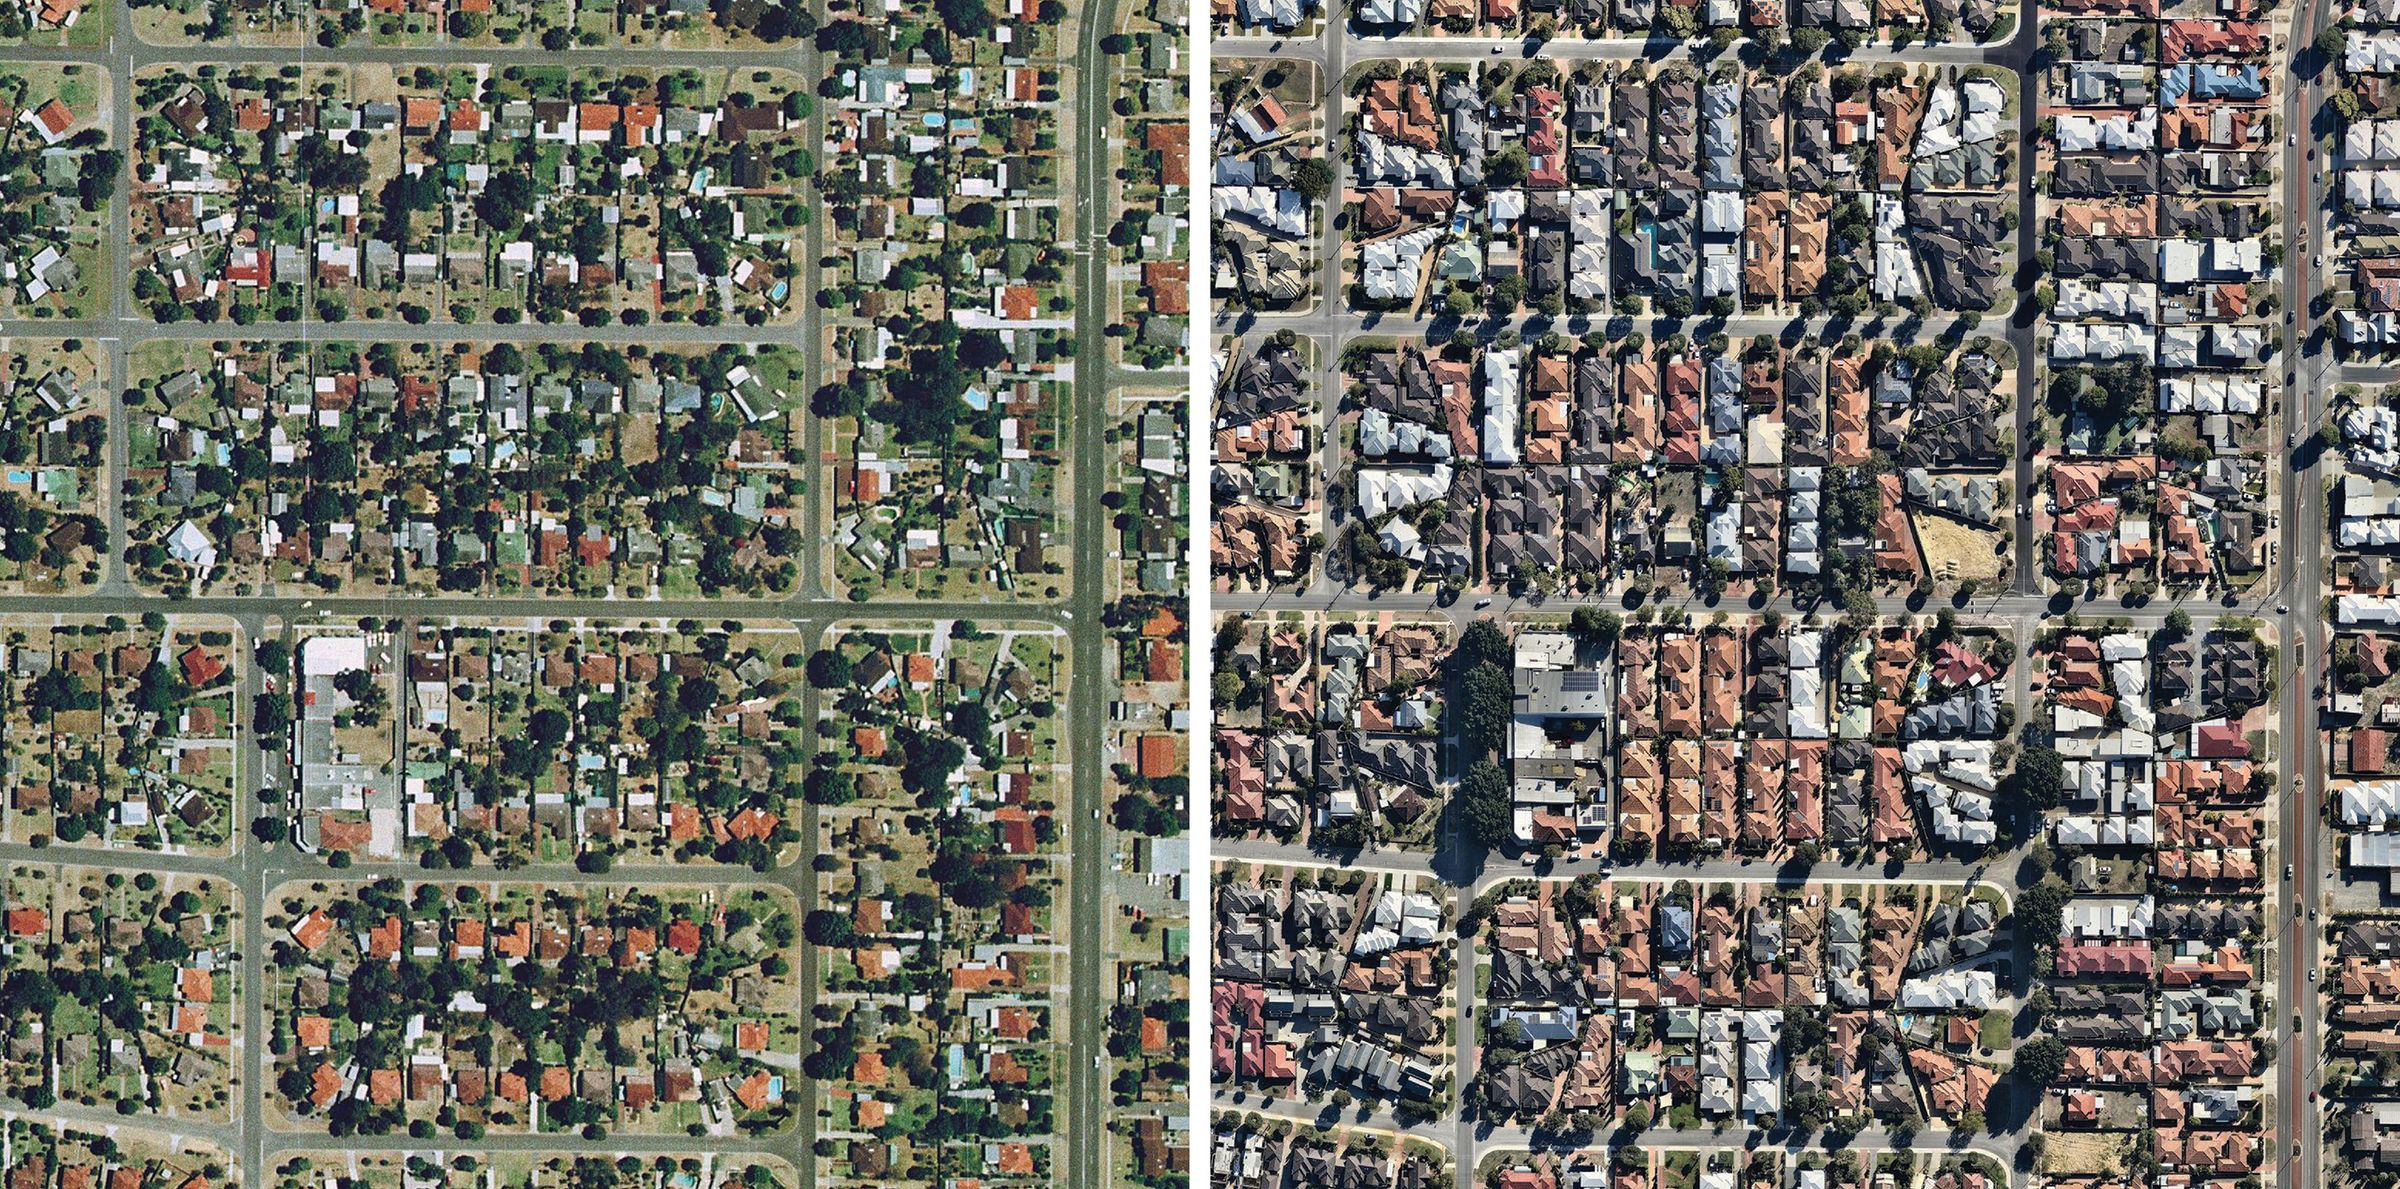 Two birds-eye views of the same suburban neighbourhood with increasing amounts of housing and decreasing amounts of green space and trees